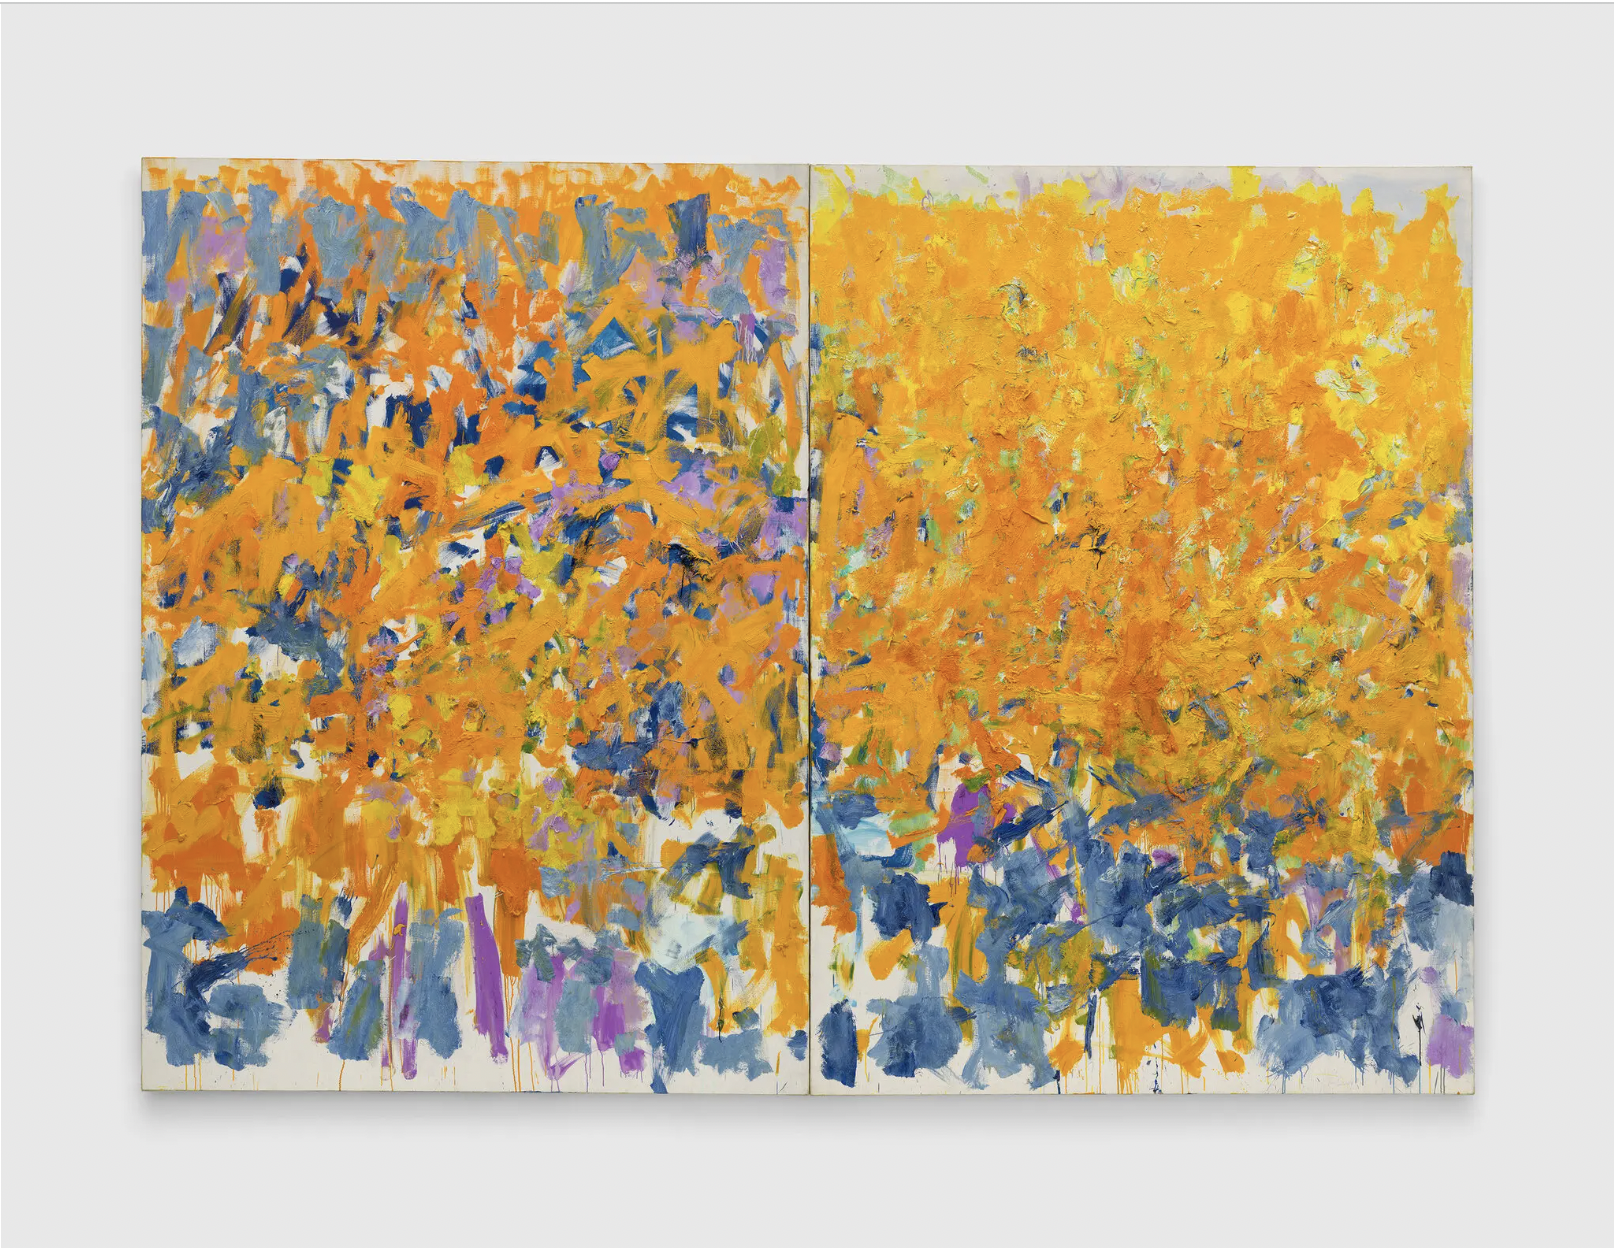 A large abstract painting consisting of two canvases features colorful brushstrokes painted in a way that resembles a close-up of an Impressionist painting. The upper half of the painting is dominated by the color yellow, while the lower half has more blue tones. At second glance, the yellow color comprises not only yellow, but orange, lilac, and blue.